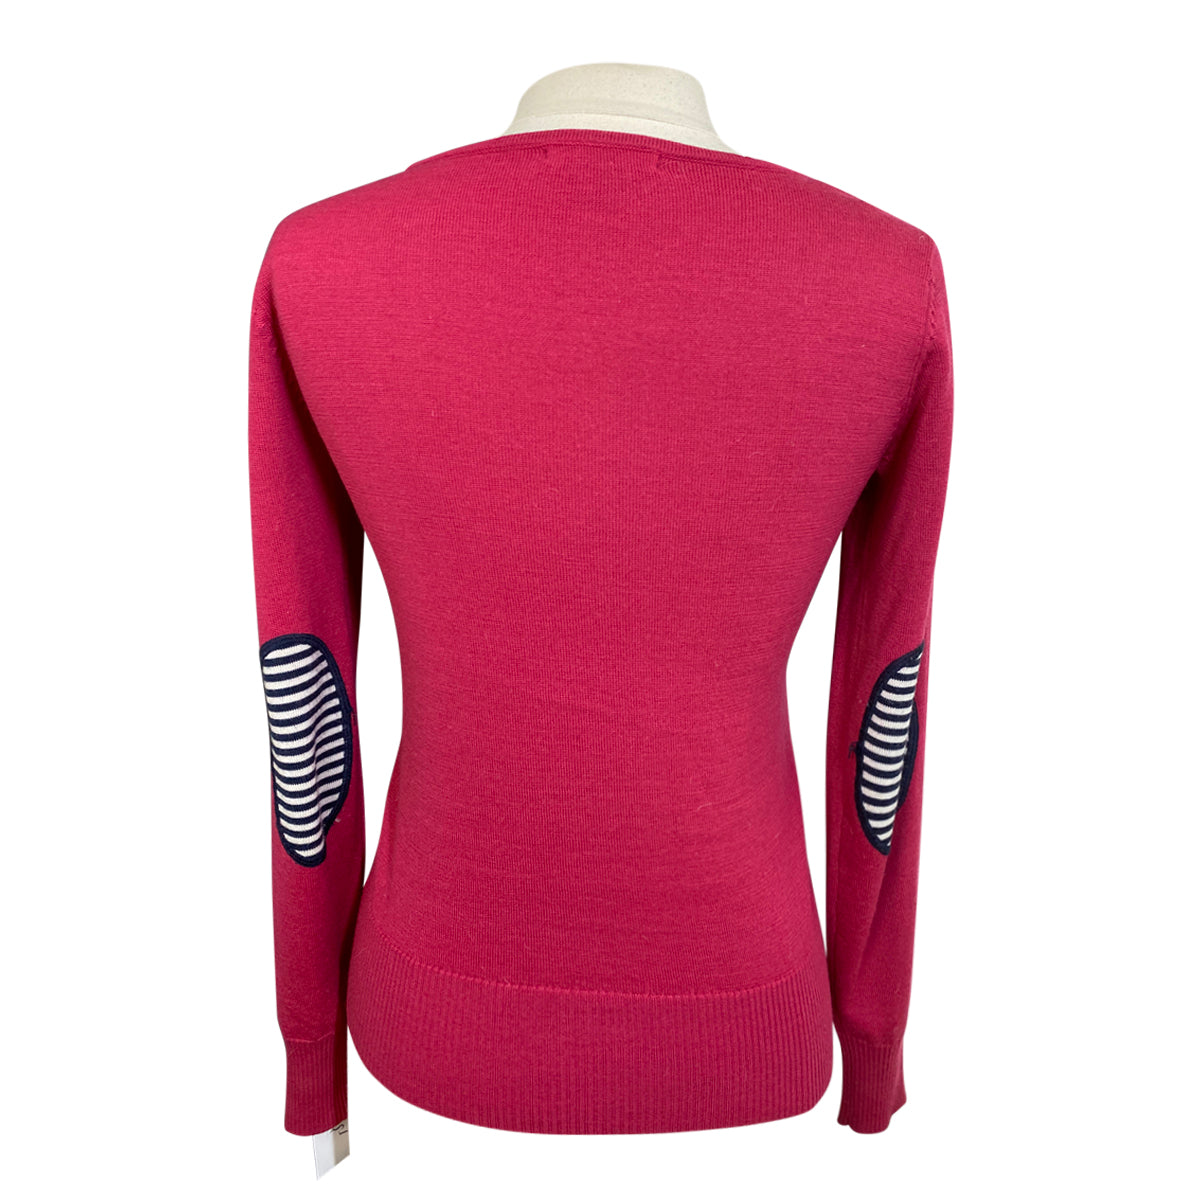 Ariat Wool Sweater in Pink/Navy and White Stripes